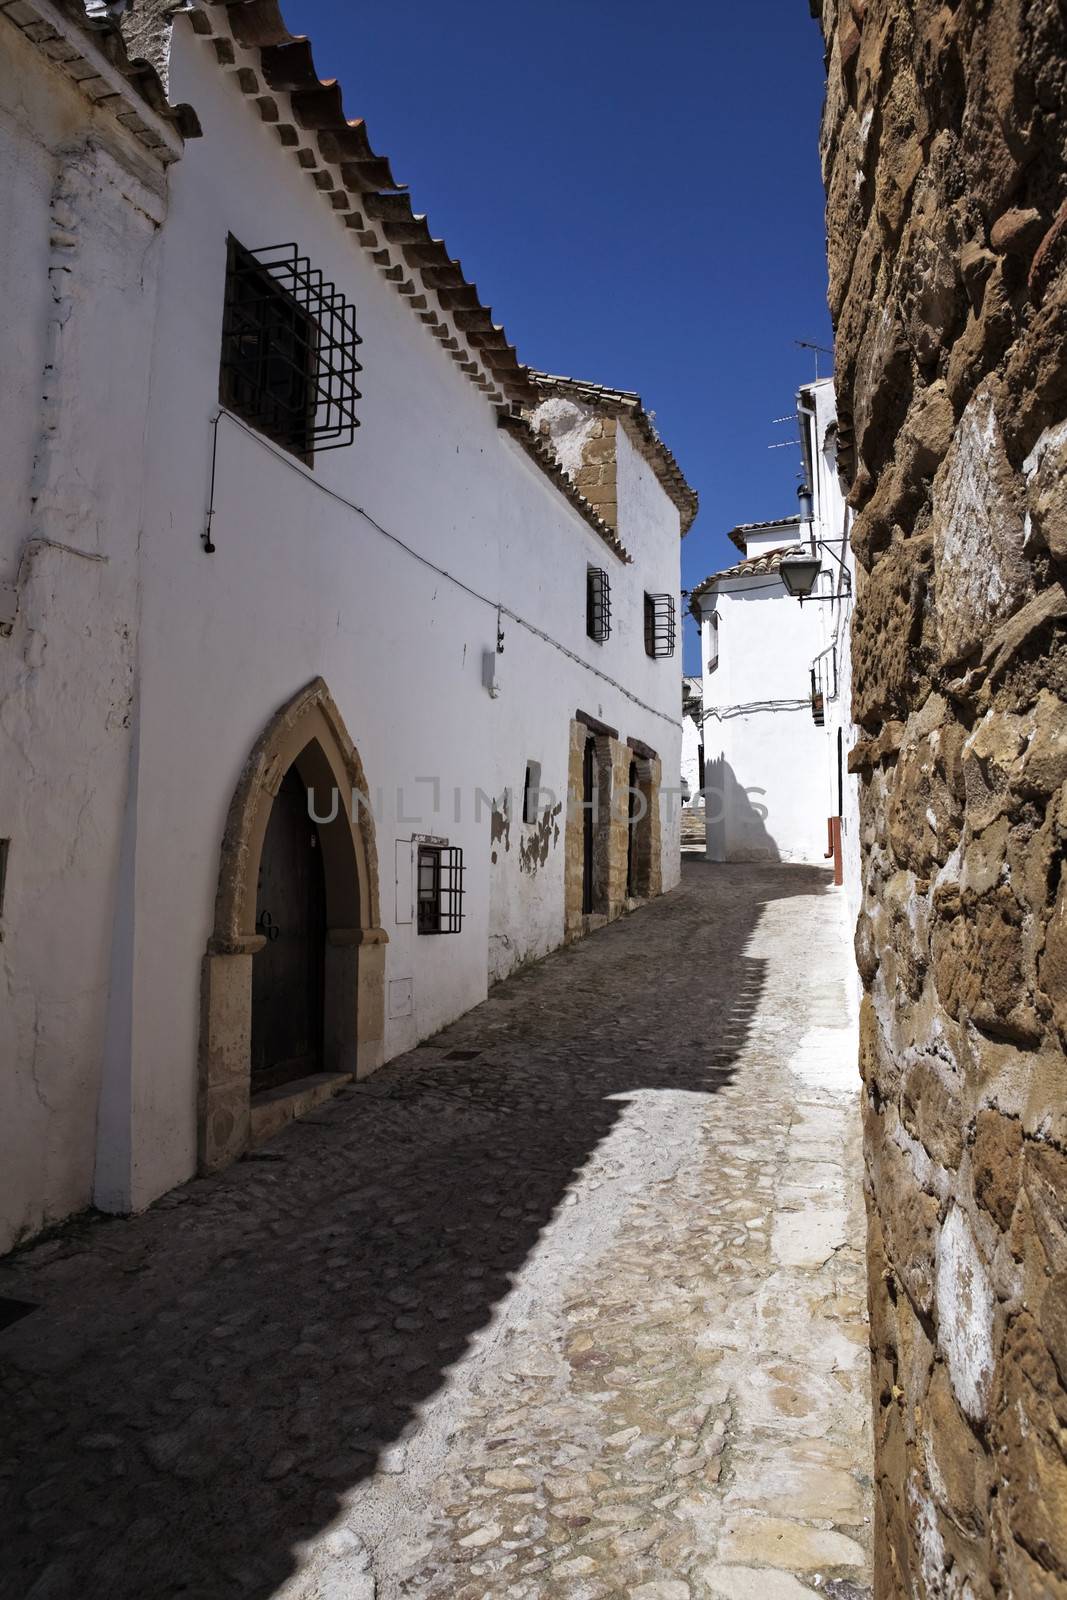 Street of Ubeda, Jaen province, Andalusia, Spain